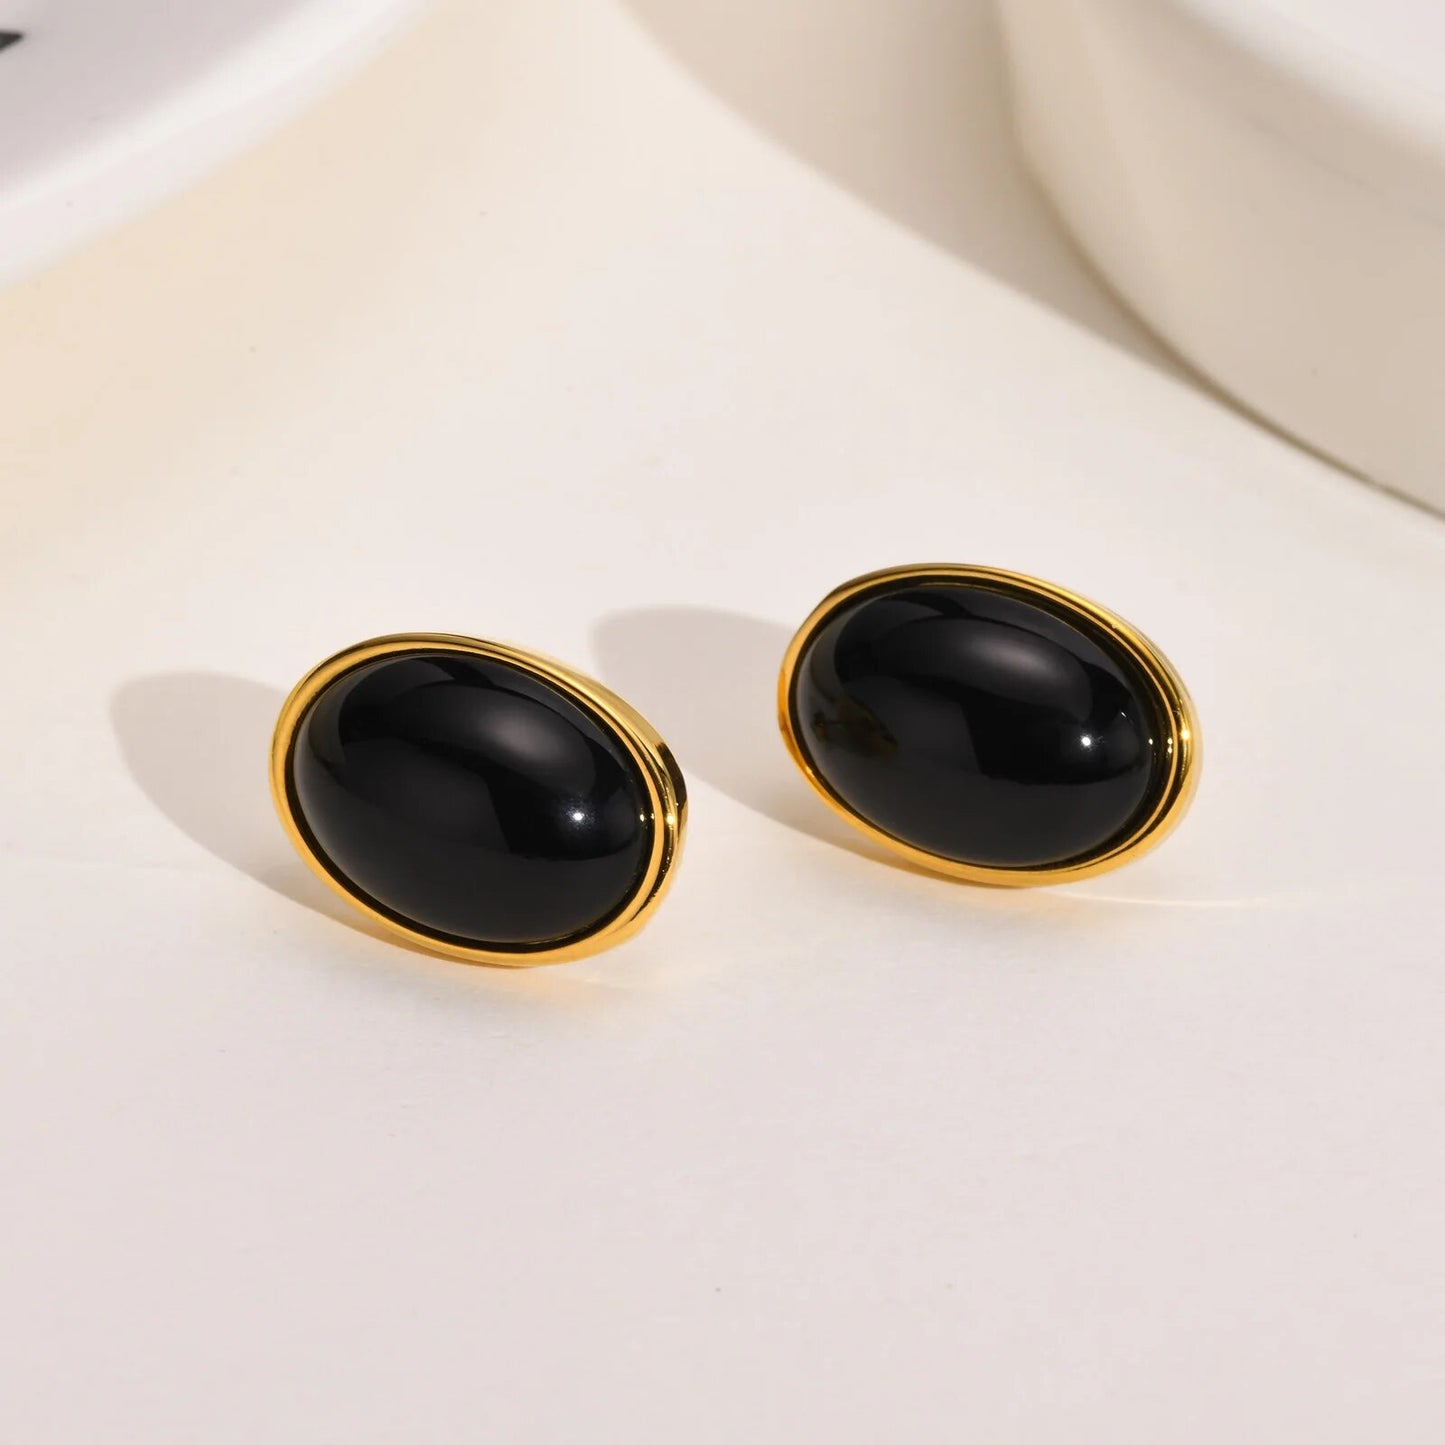 Women's Earrings Aretes para mujeres Retro Oval Black Natural Stone Stud Earrings for Women Gifts Jewelry, Gold Color Stainless Steel Ear Fashion Accessory